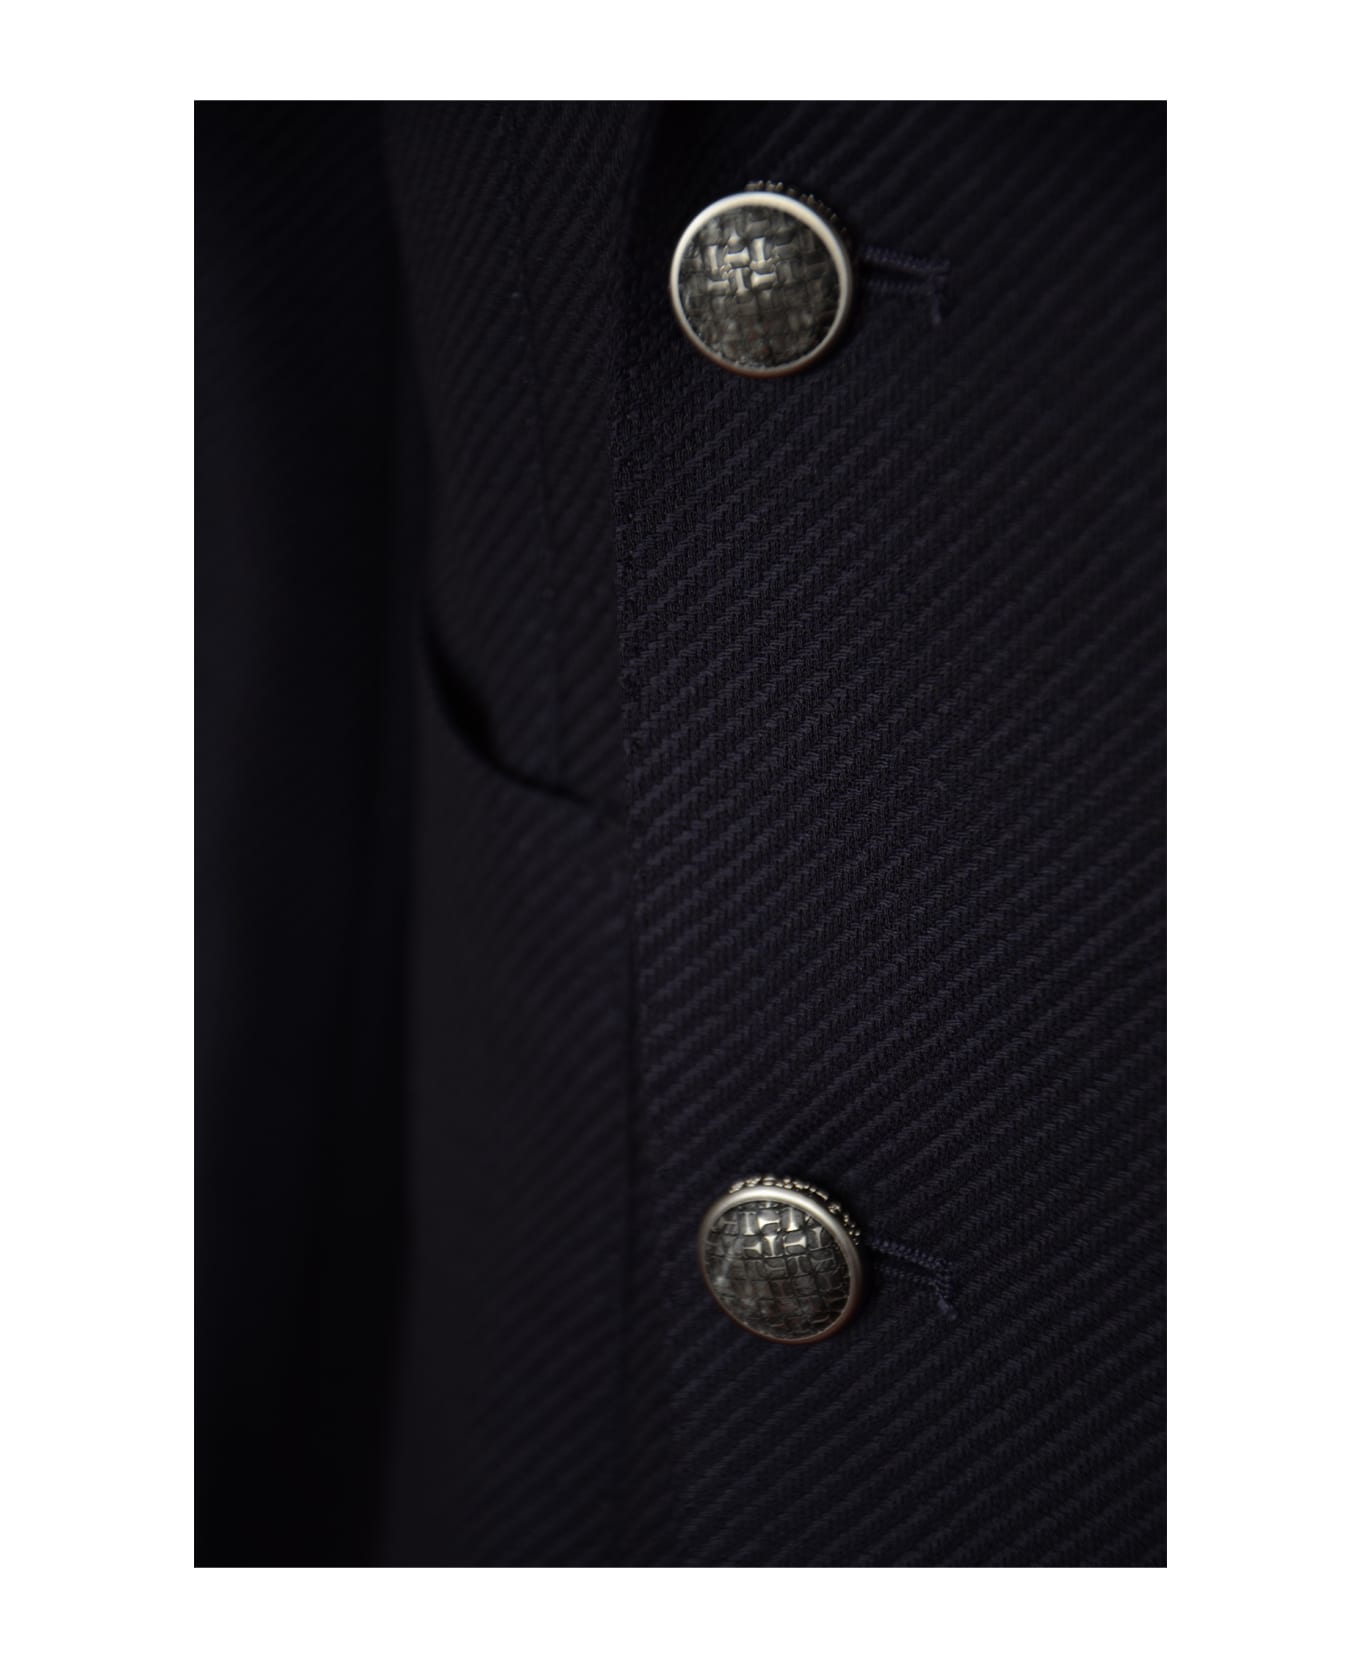 Tagliatore Patched Pocket Double-breasted Dinner Jacket